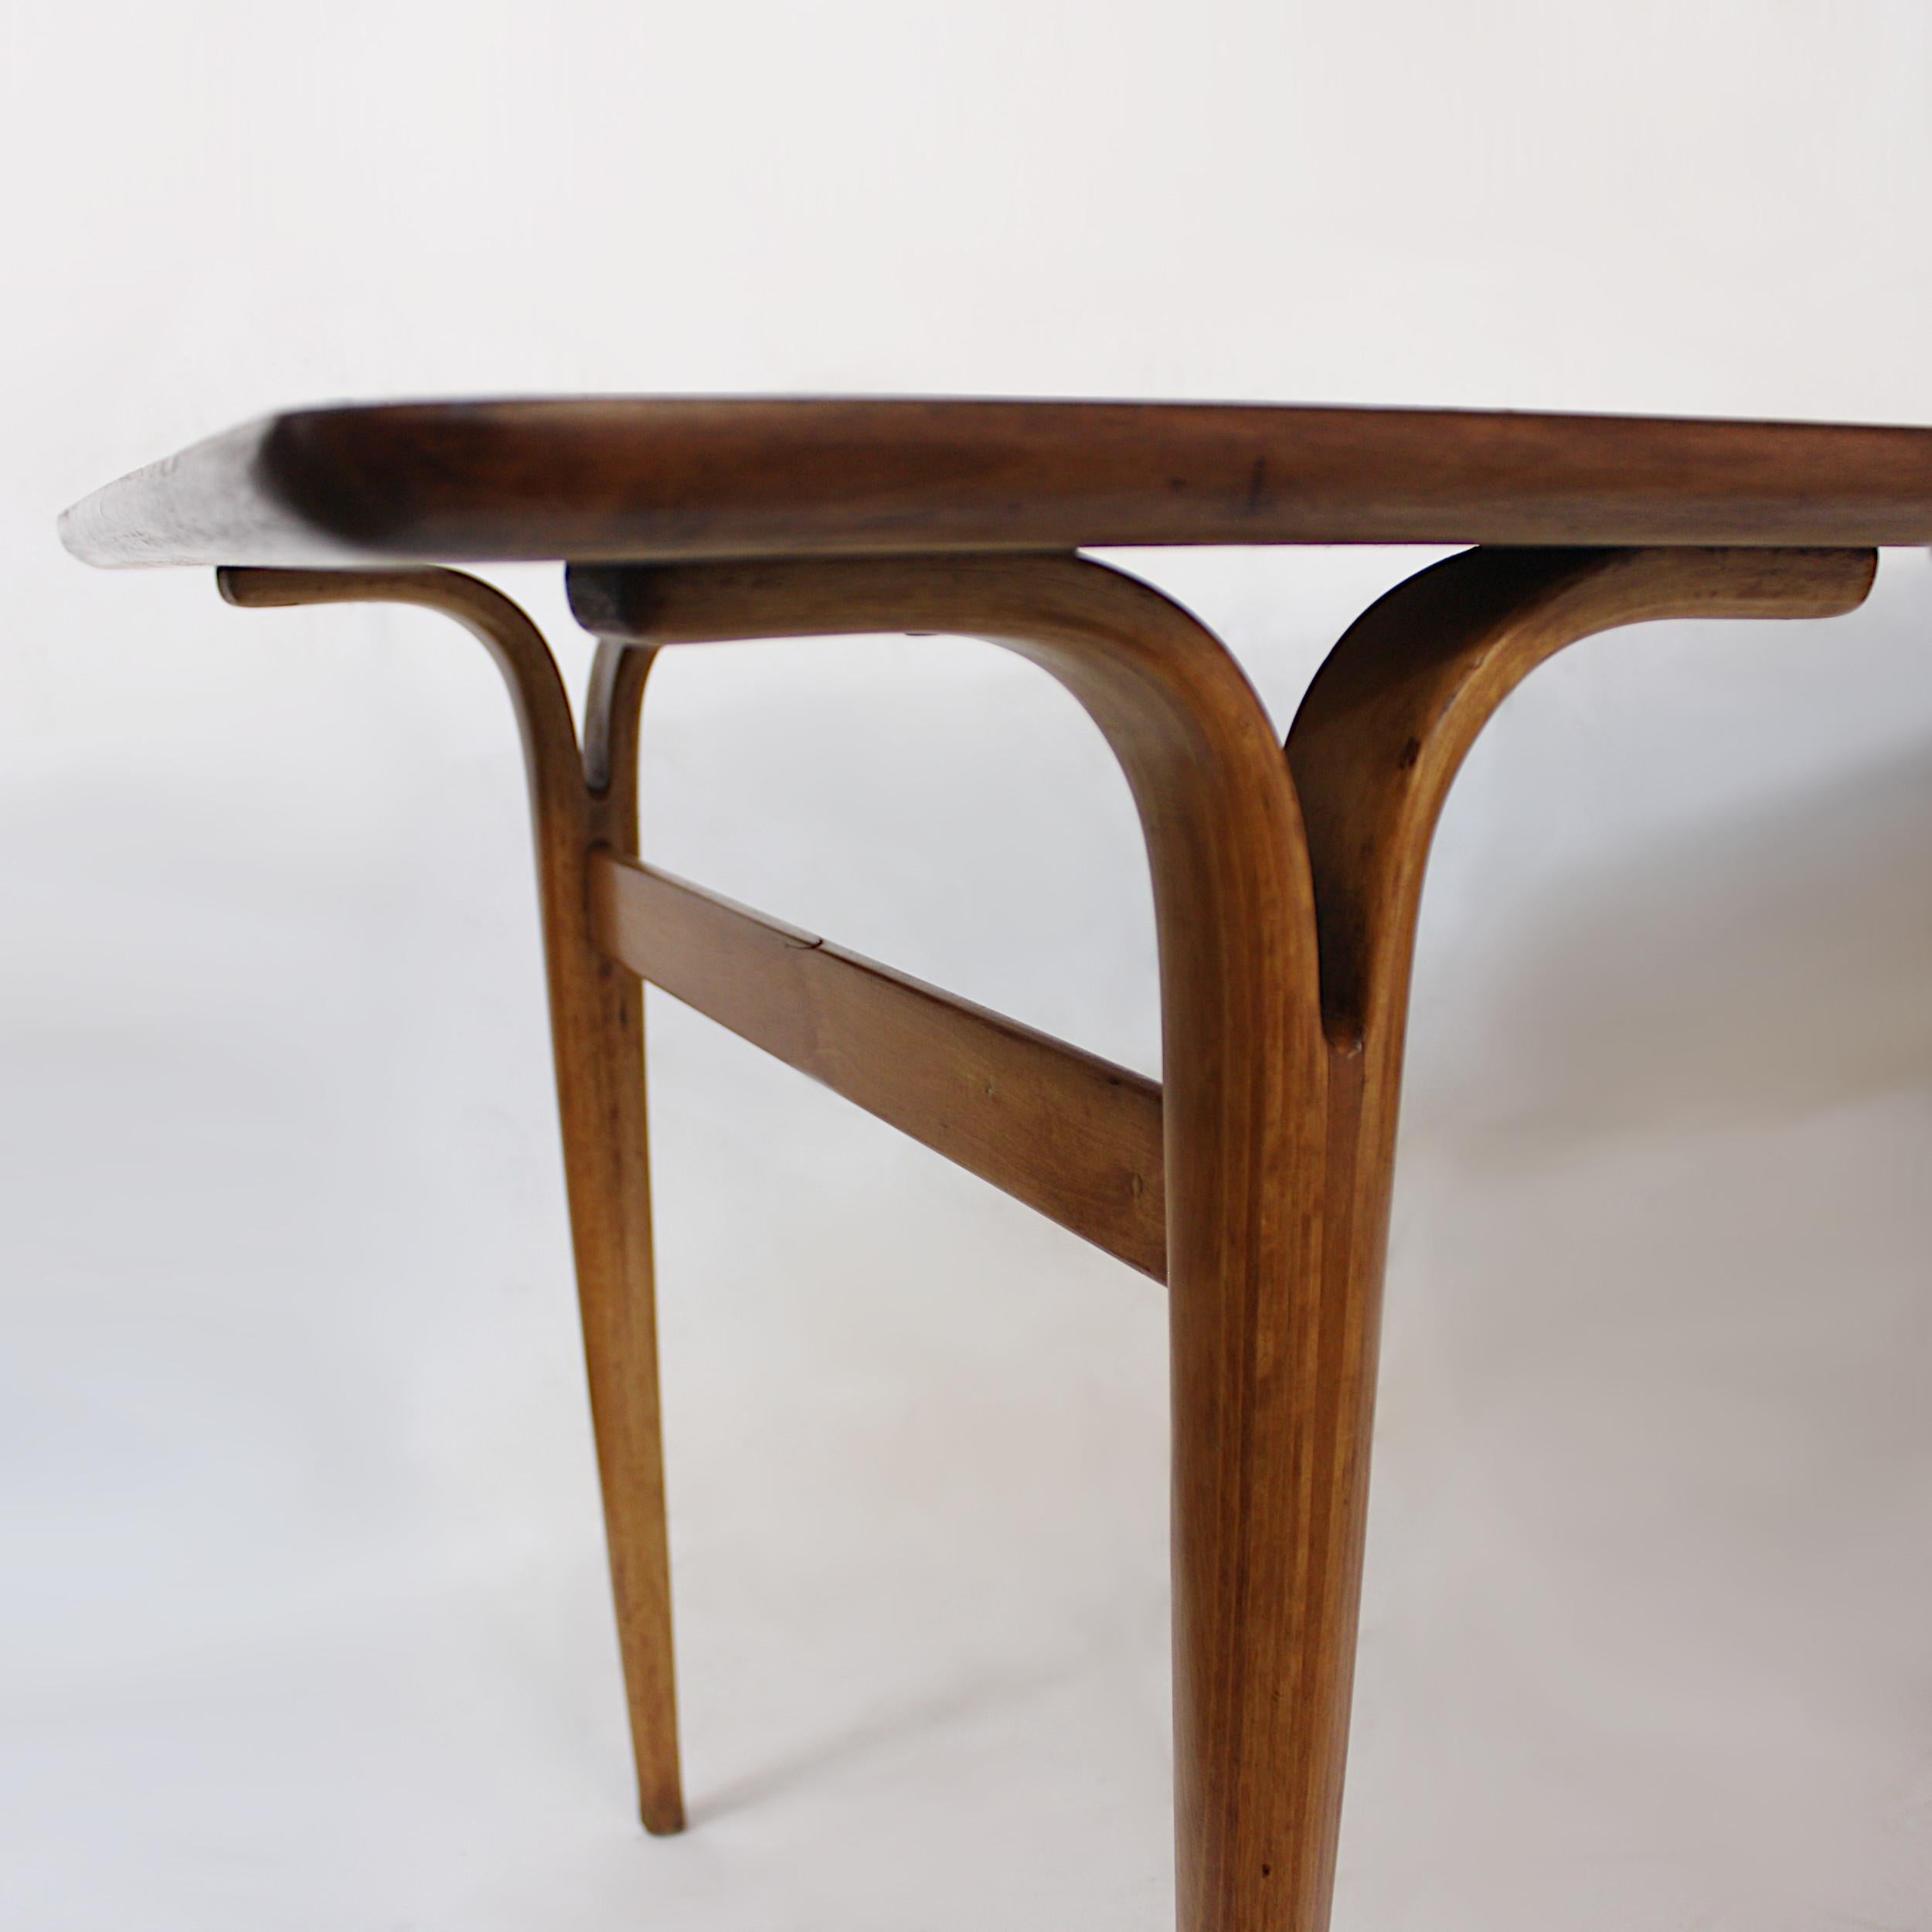 Veneer 1950s Mid-Century Modern Teak and Beech Table with Cleft Legs by Bruno Mathsson